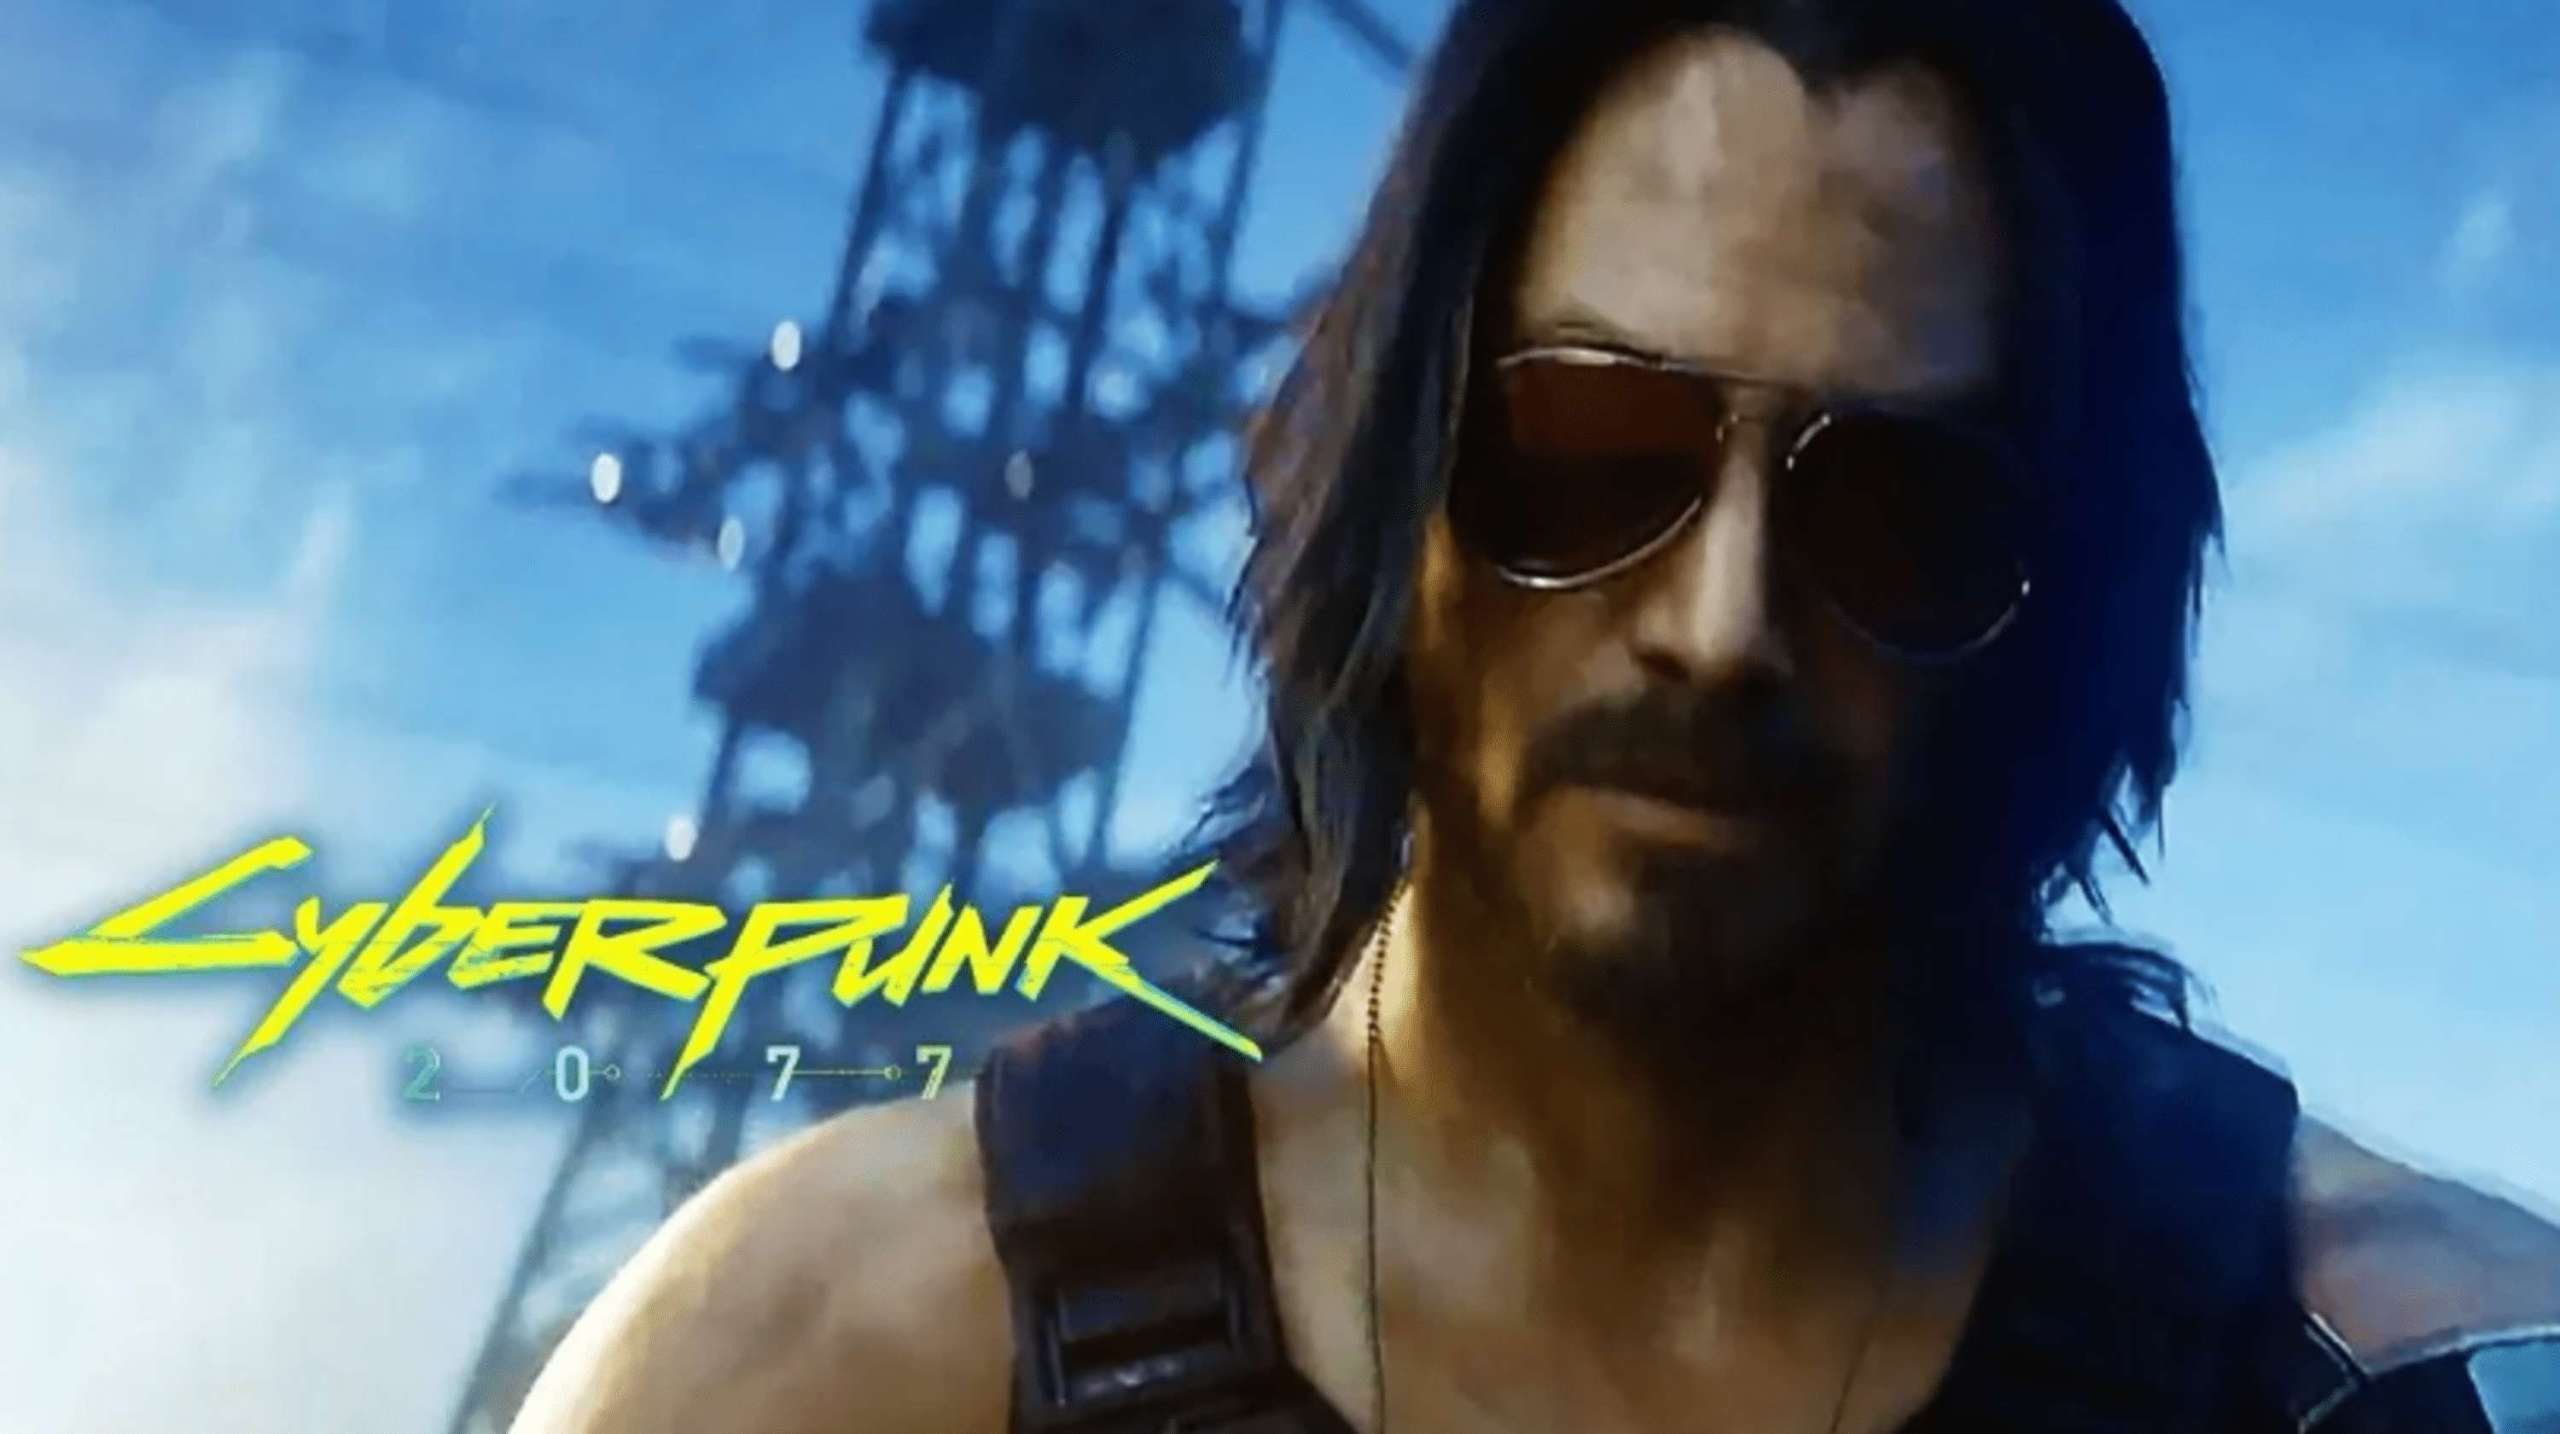 With The Success Of Edgerunner, Sales Of Cyberpunk 2077 Have Surpassed 20 Million Copies